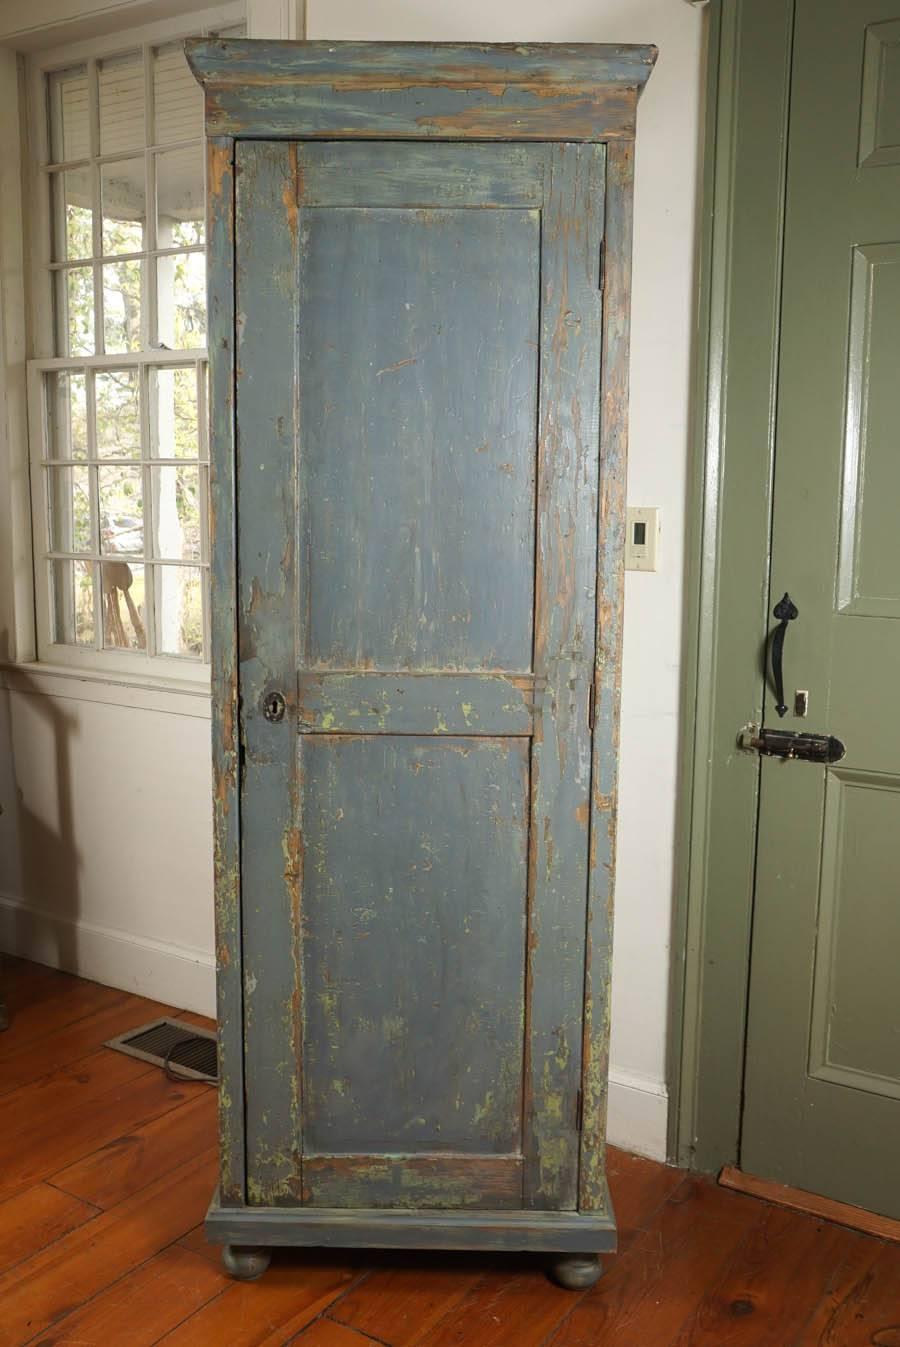 This original painted grey/green one door cupboard has original hardware with lock and keep. The wear on the paint is perfect and the size is not massive. The bun feet give it character and inside you will find three shelves.